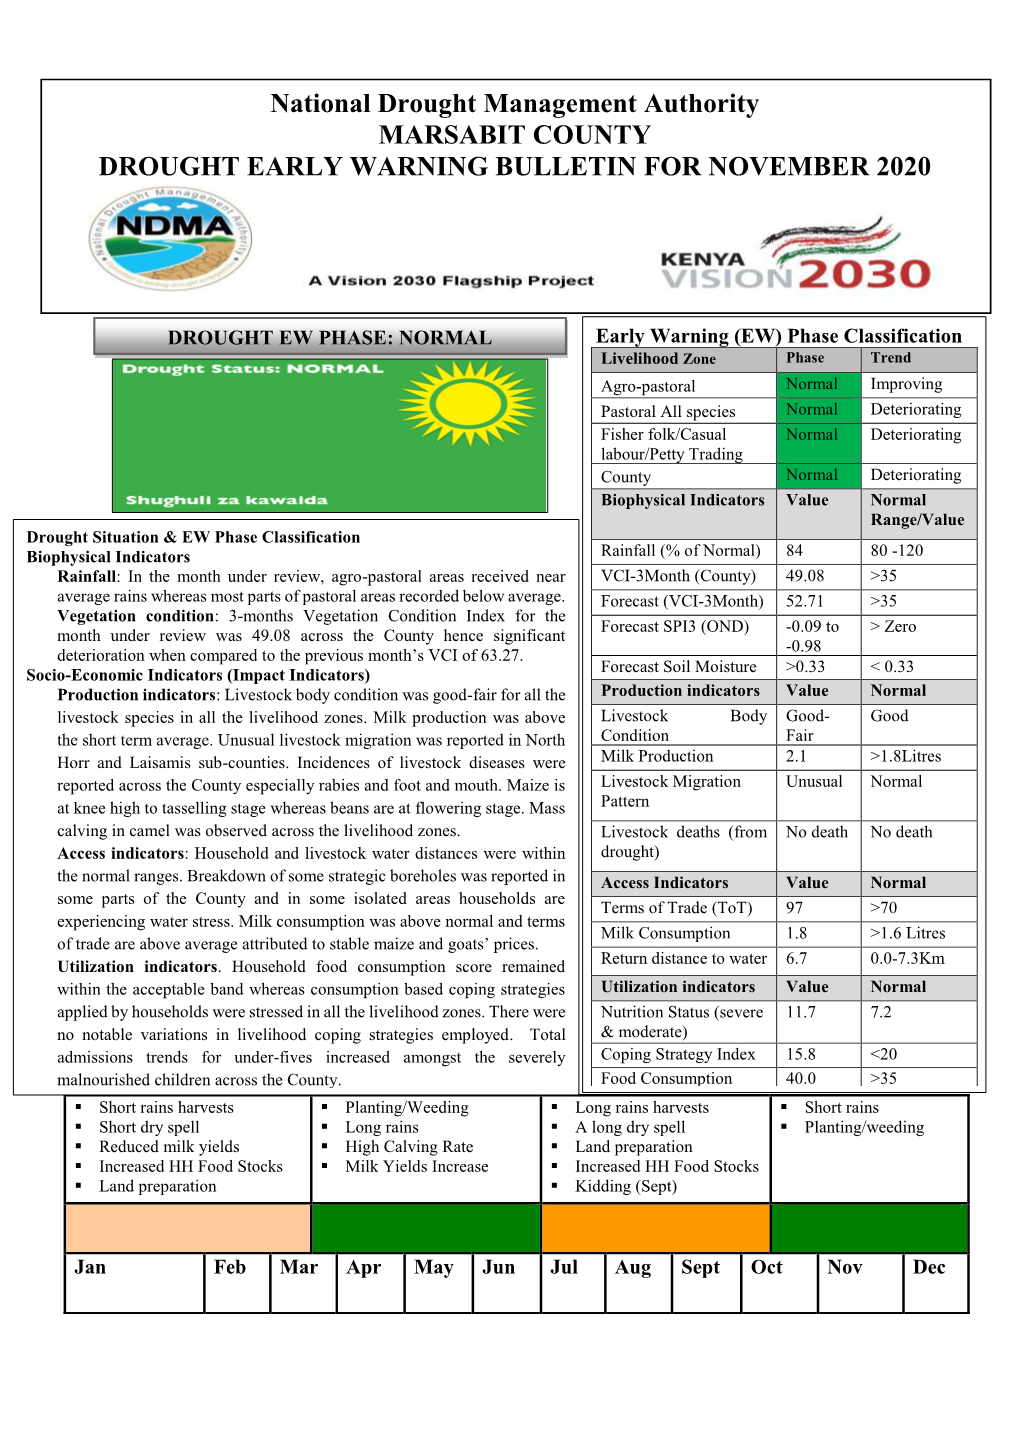 National Drought Management Authority MARSABIT COUNTY DROUGHT EARLY WARNING BULLETIN for NOVEMBER 2020